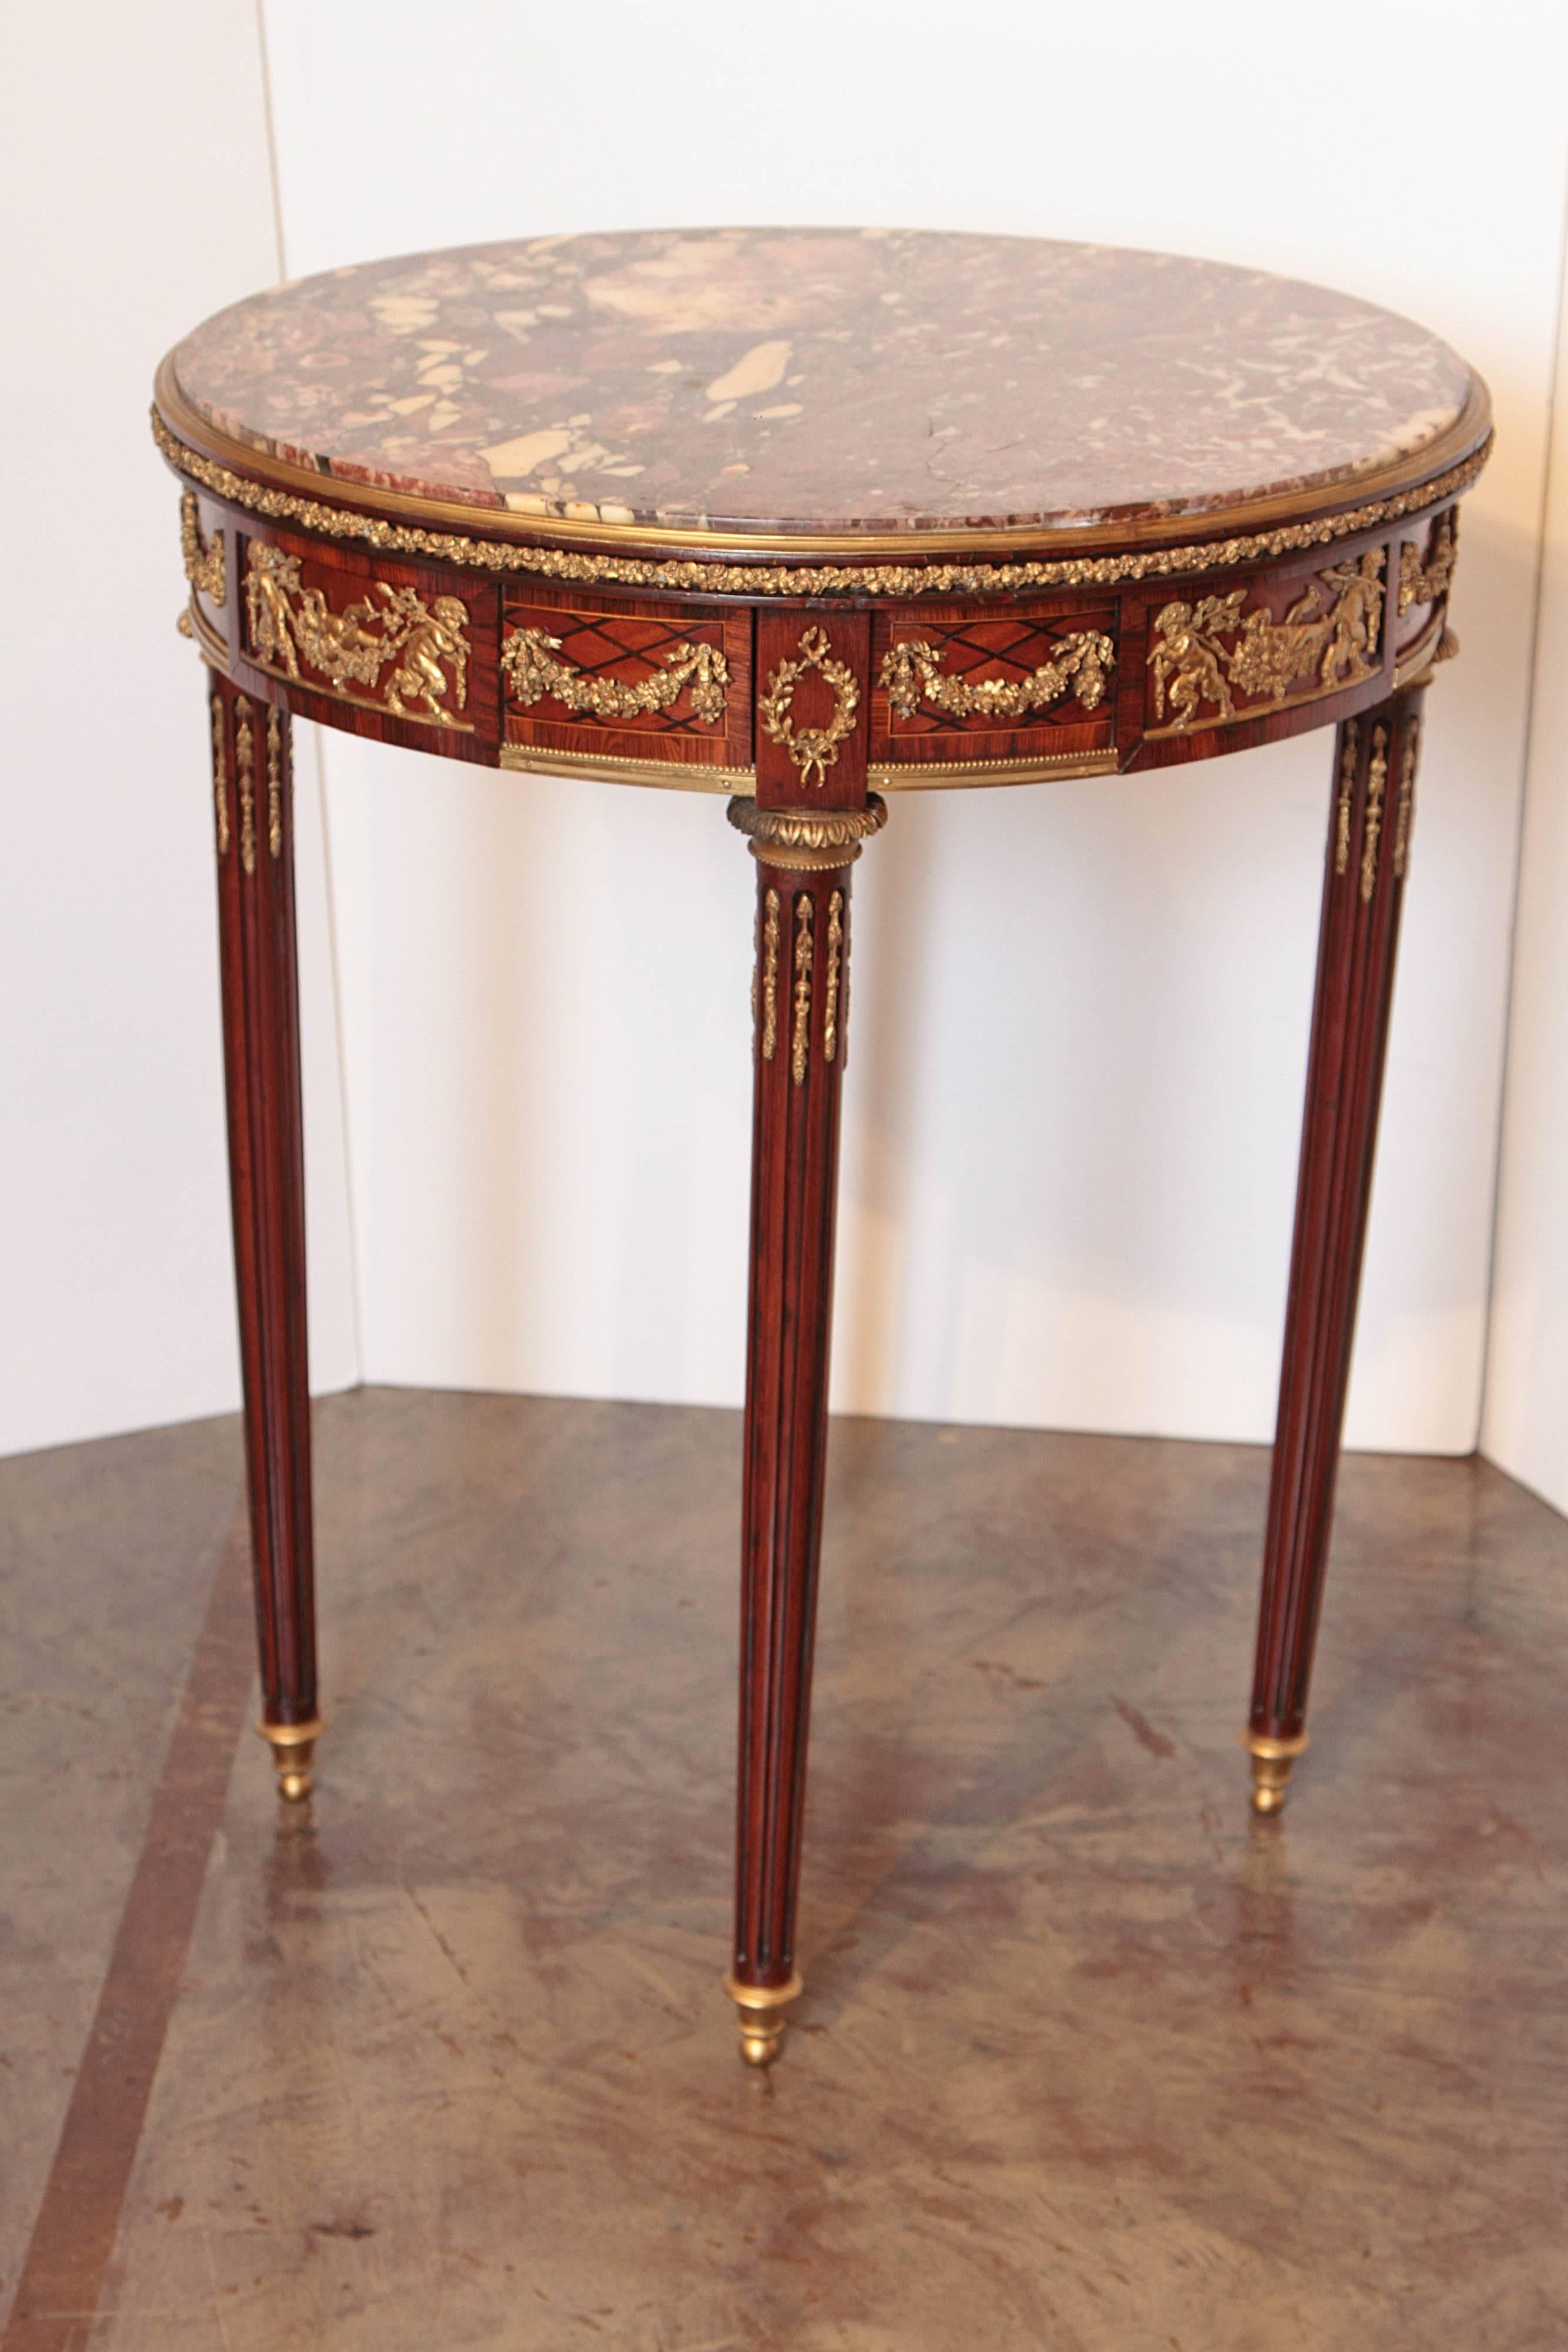 European 19th Century French Mahogany and Gilt Bronze Marble Top Gueridon Table For Sale